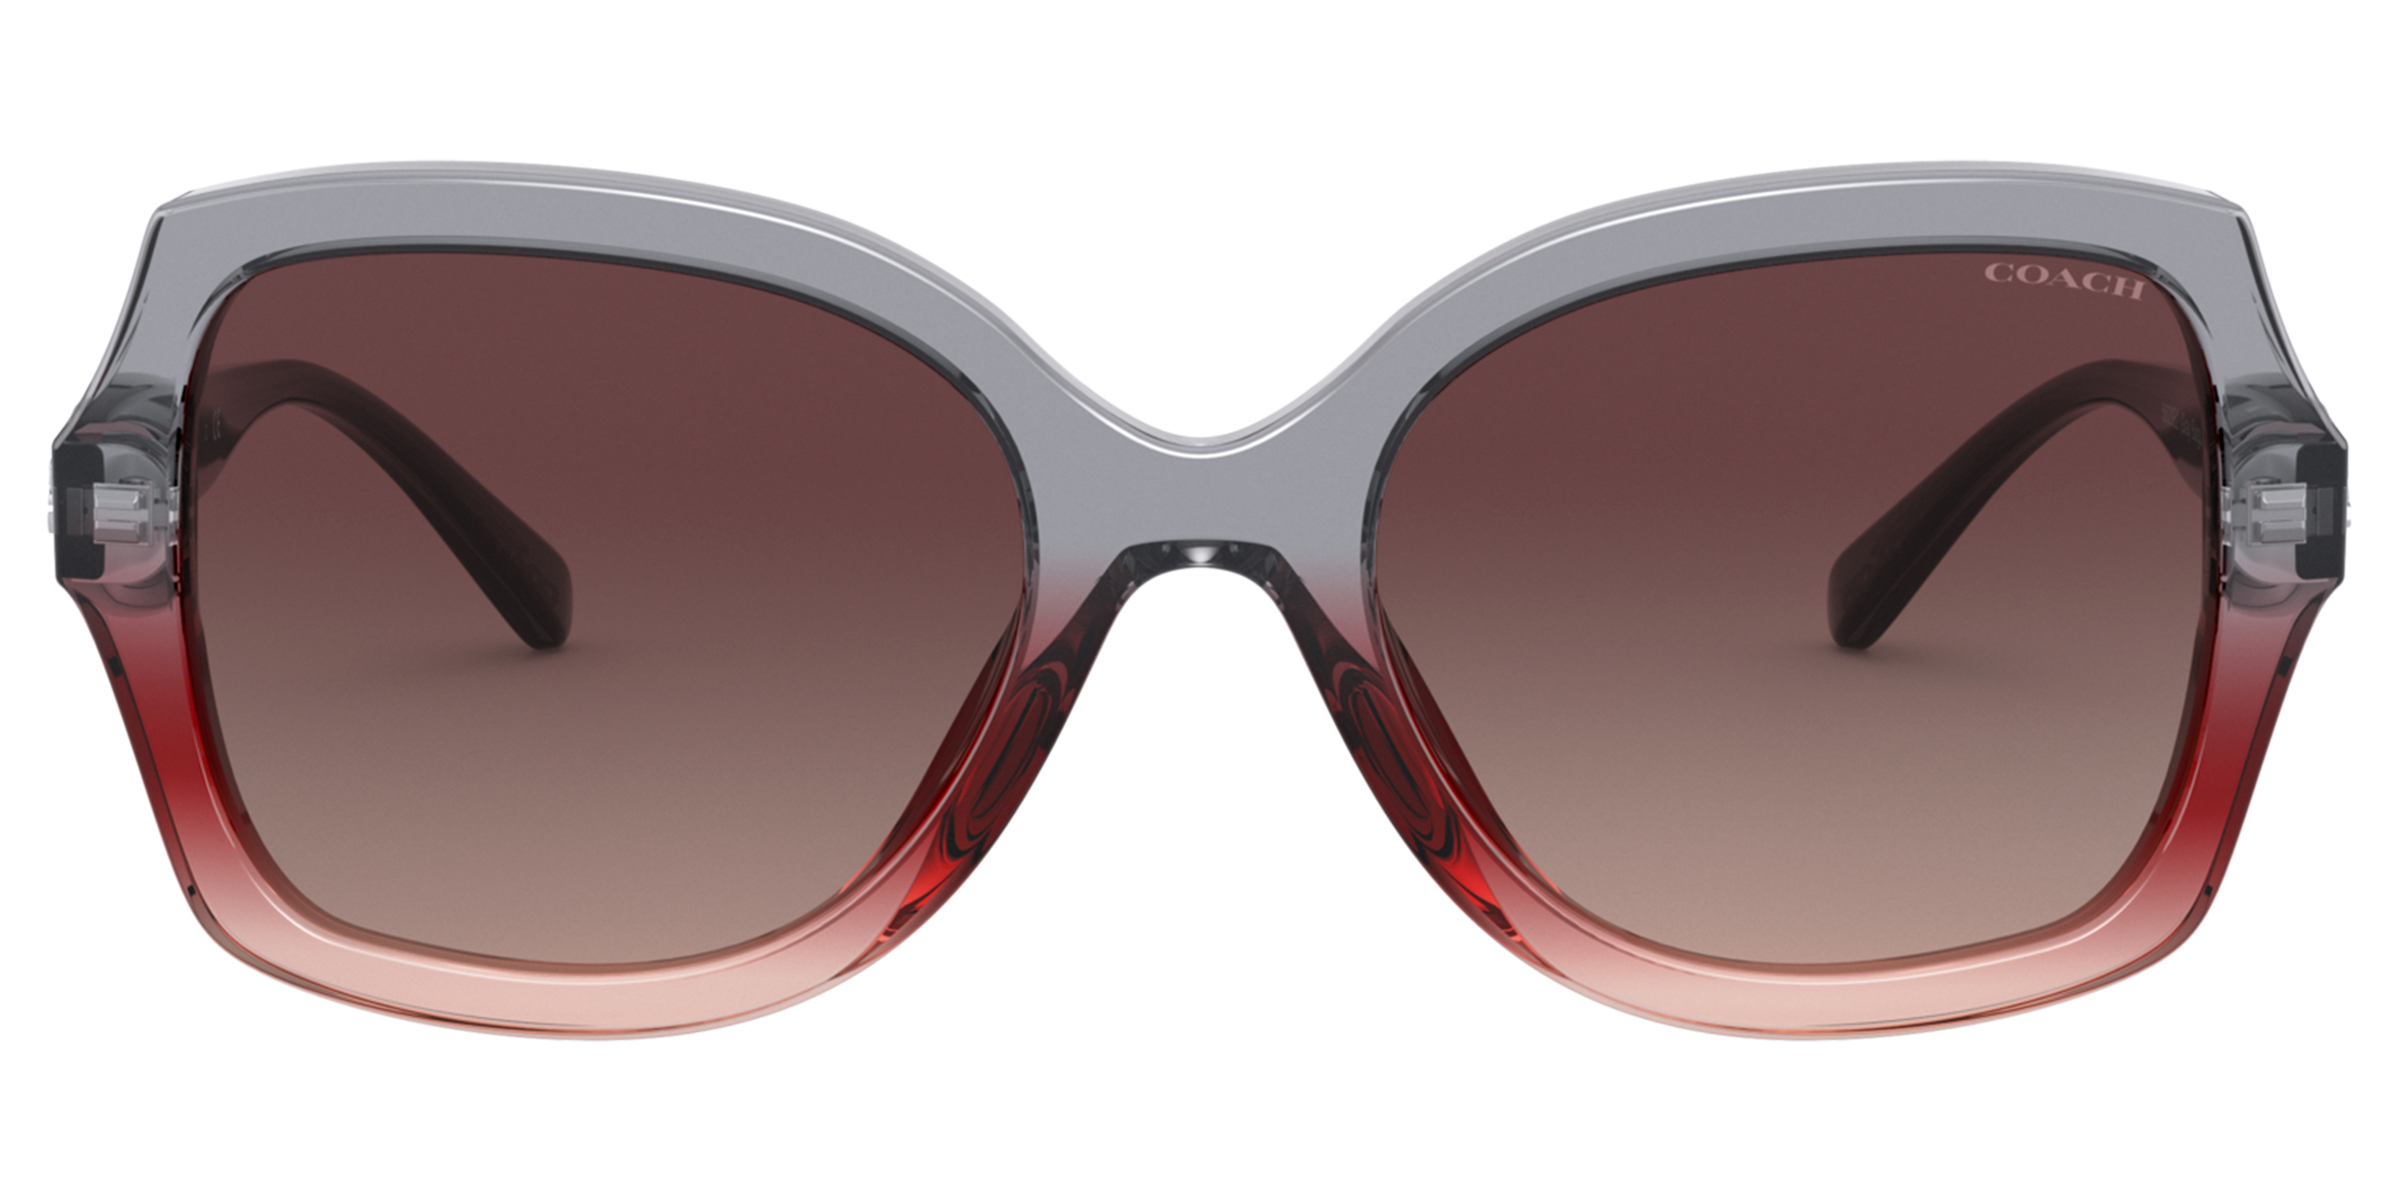 Coach HC8295 sunglasses for women at For Eyes